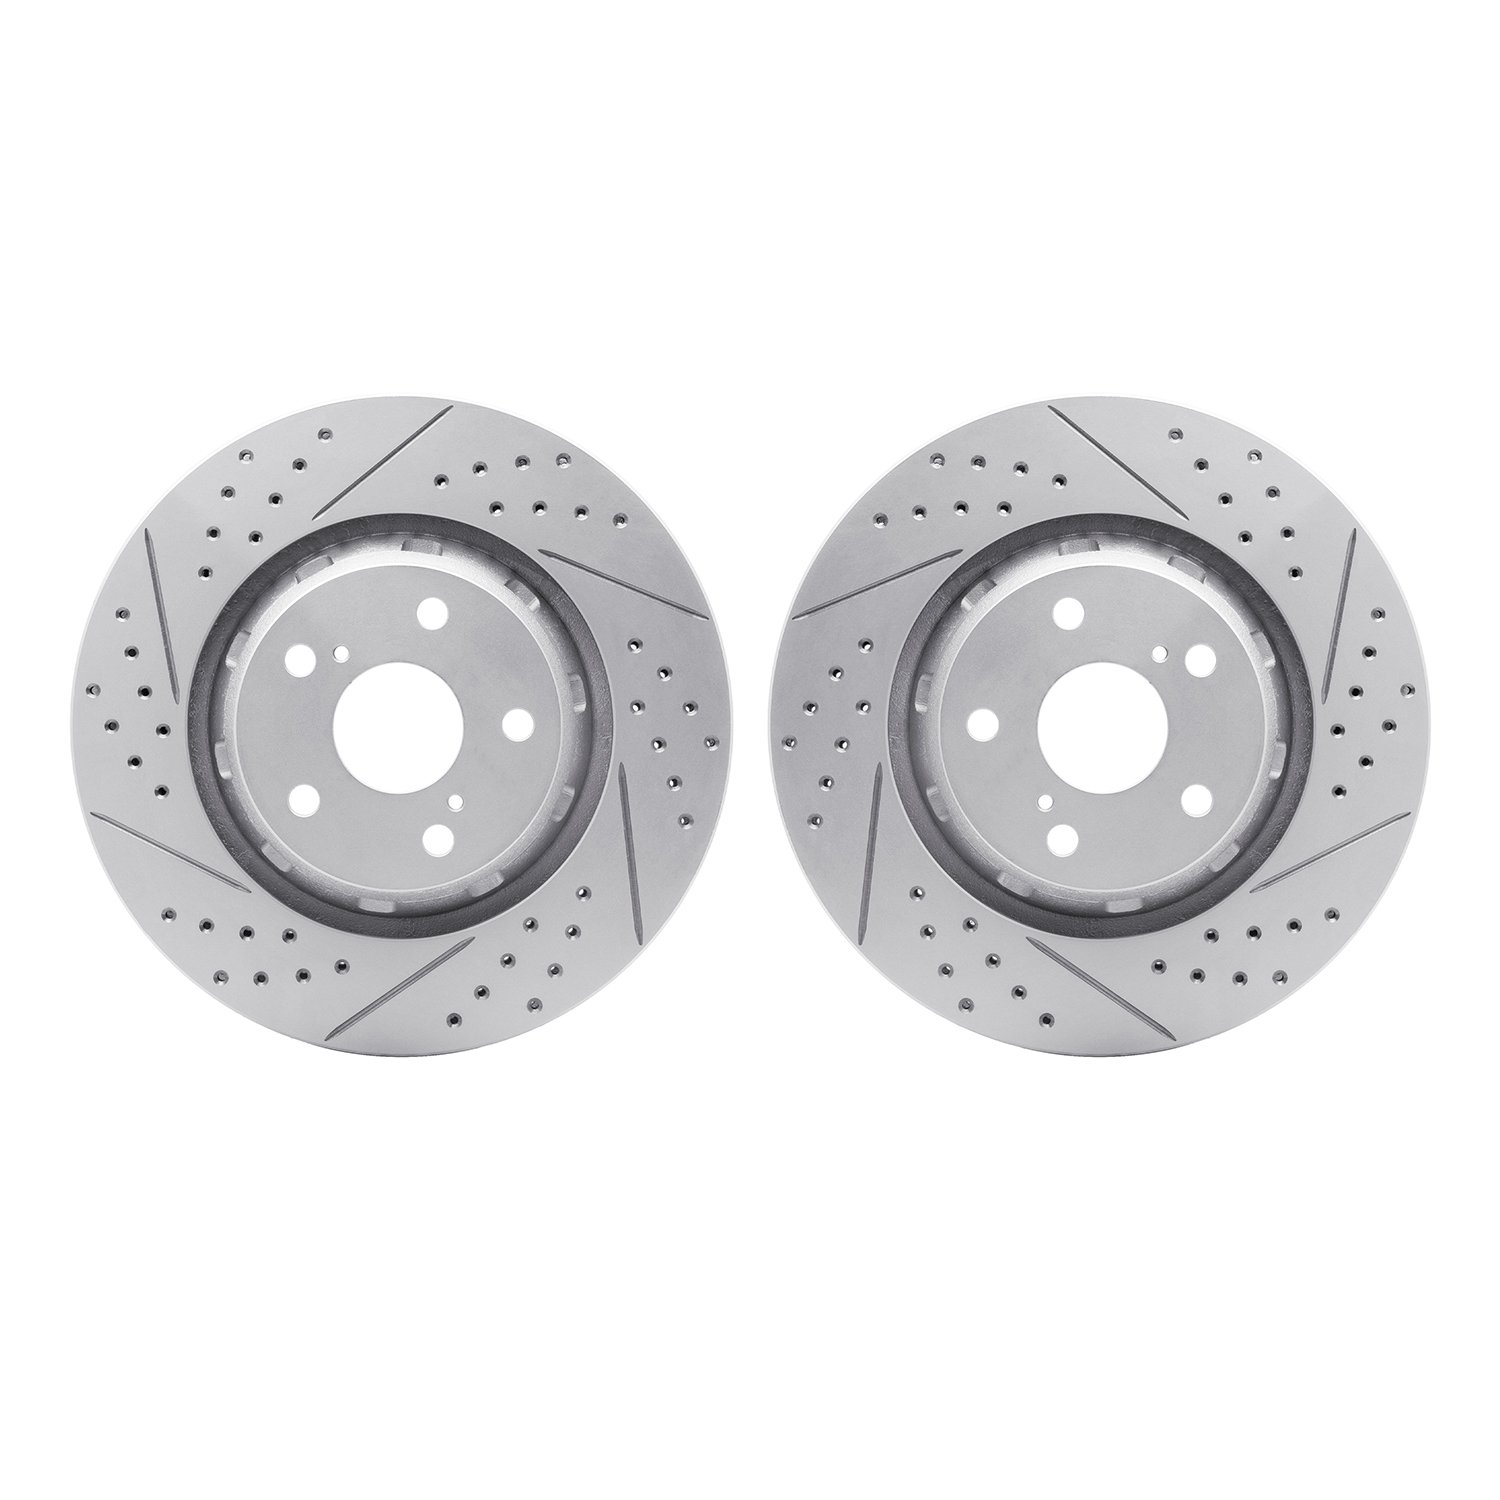 2002-76037 Geoperformance Drilled/Slotted Brake Rotors, 2009-2015 Lexus/Toyota/Scion, Position: Front